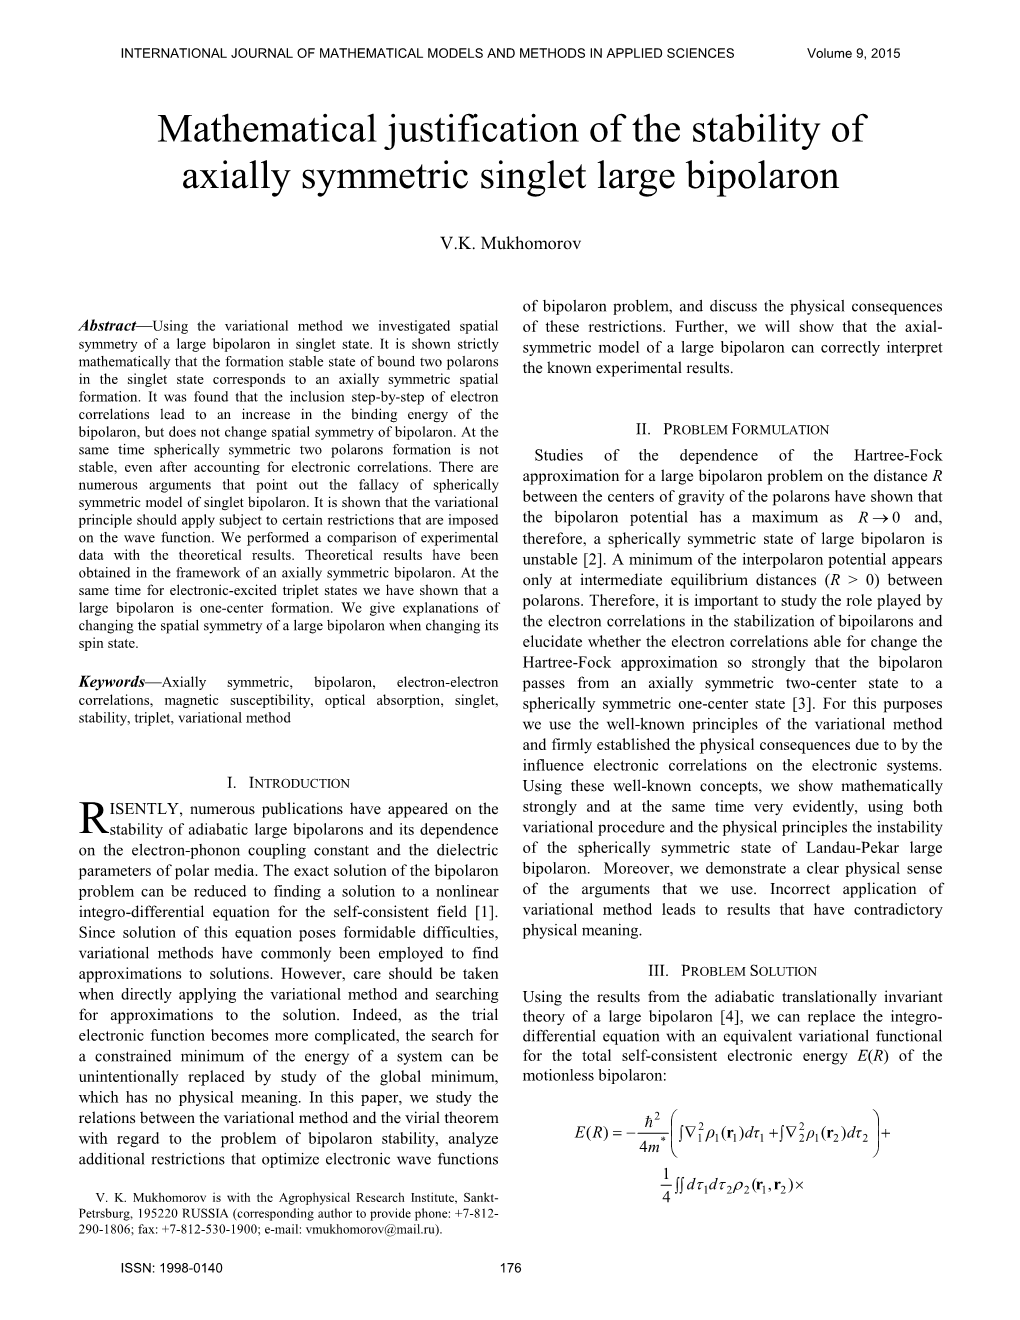 Mathematical Justification of the Stability of Axially Symmetric Singlet Large Bipolaron